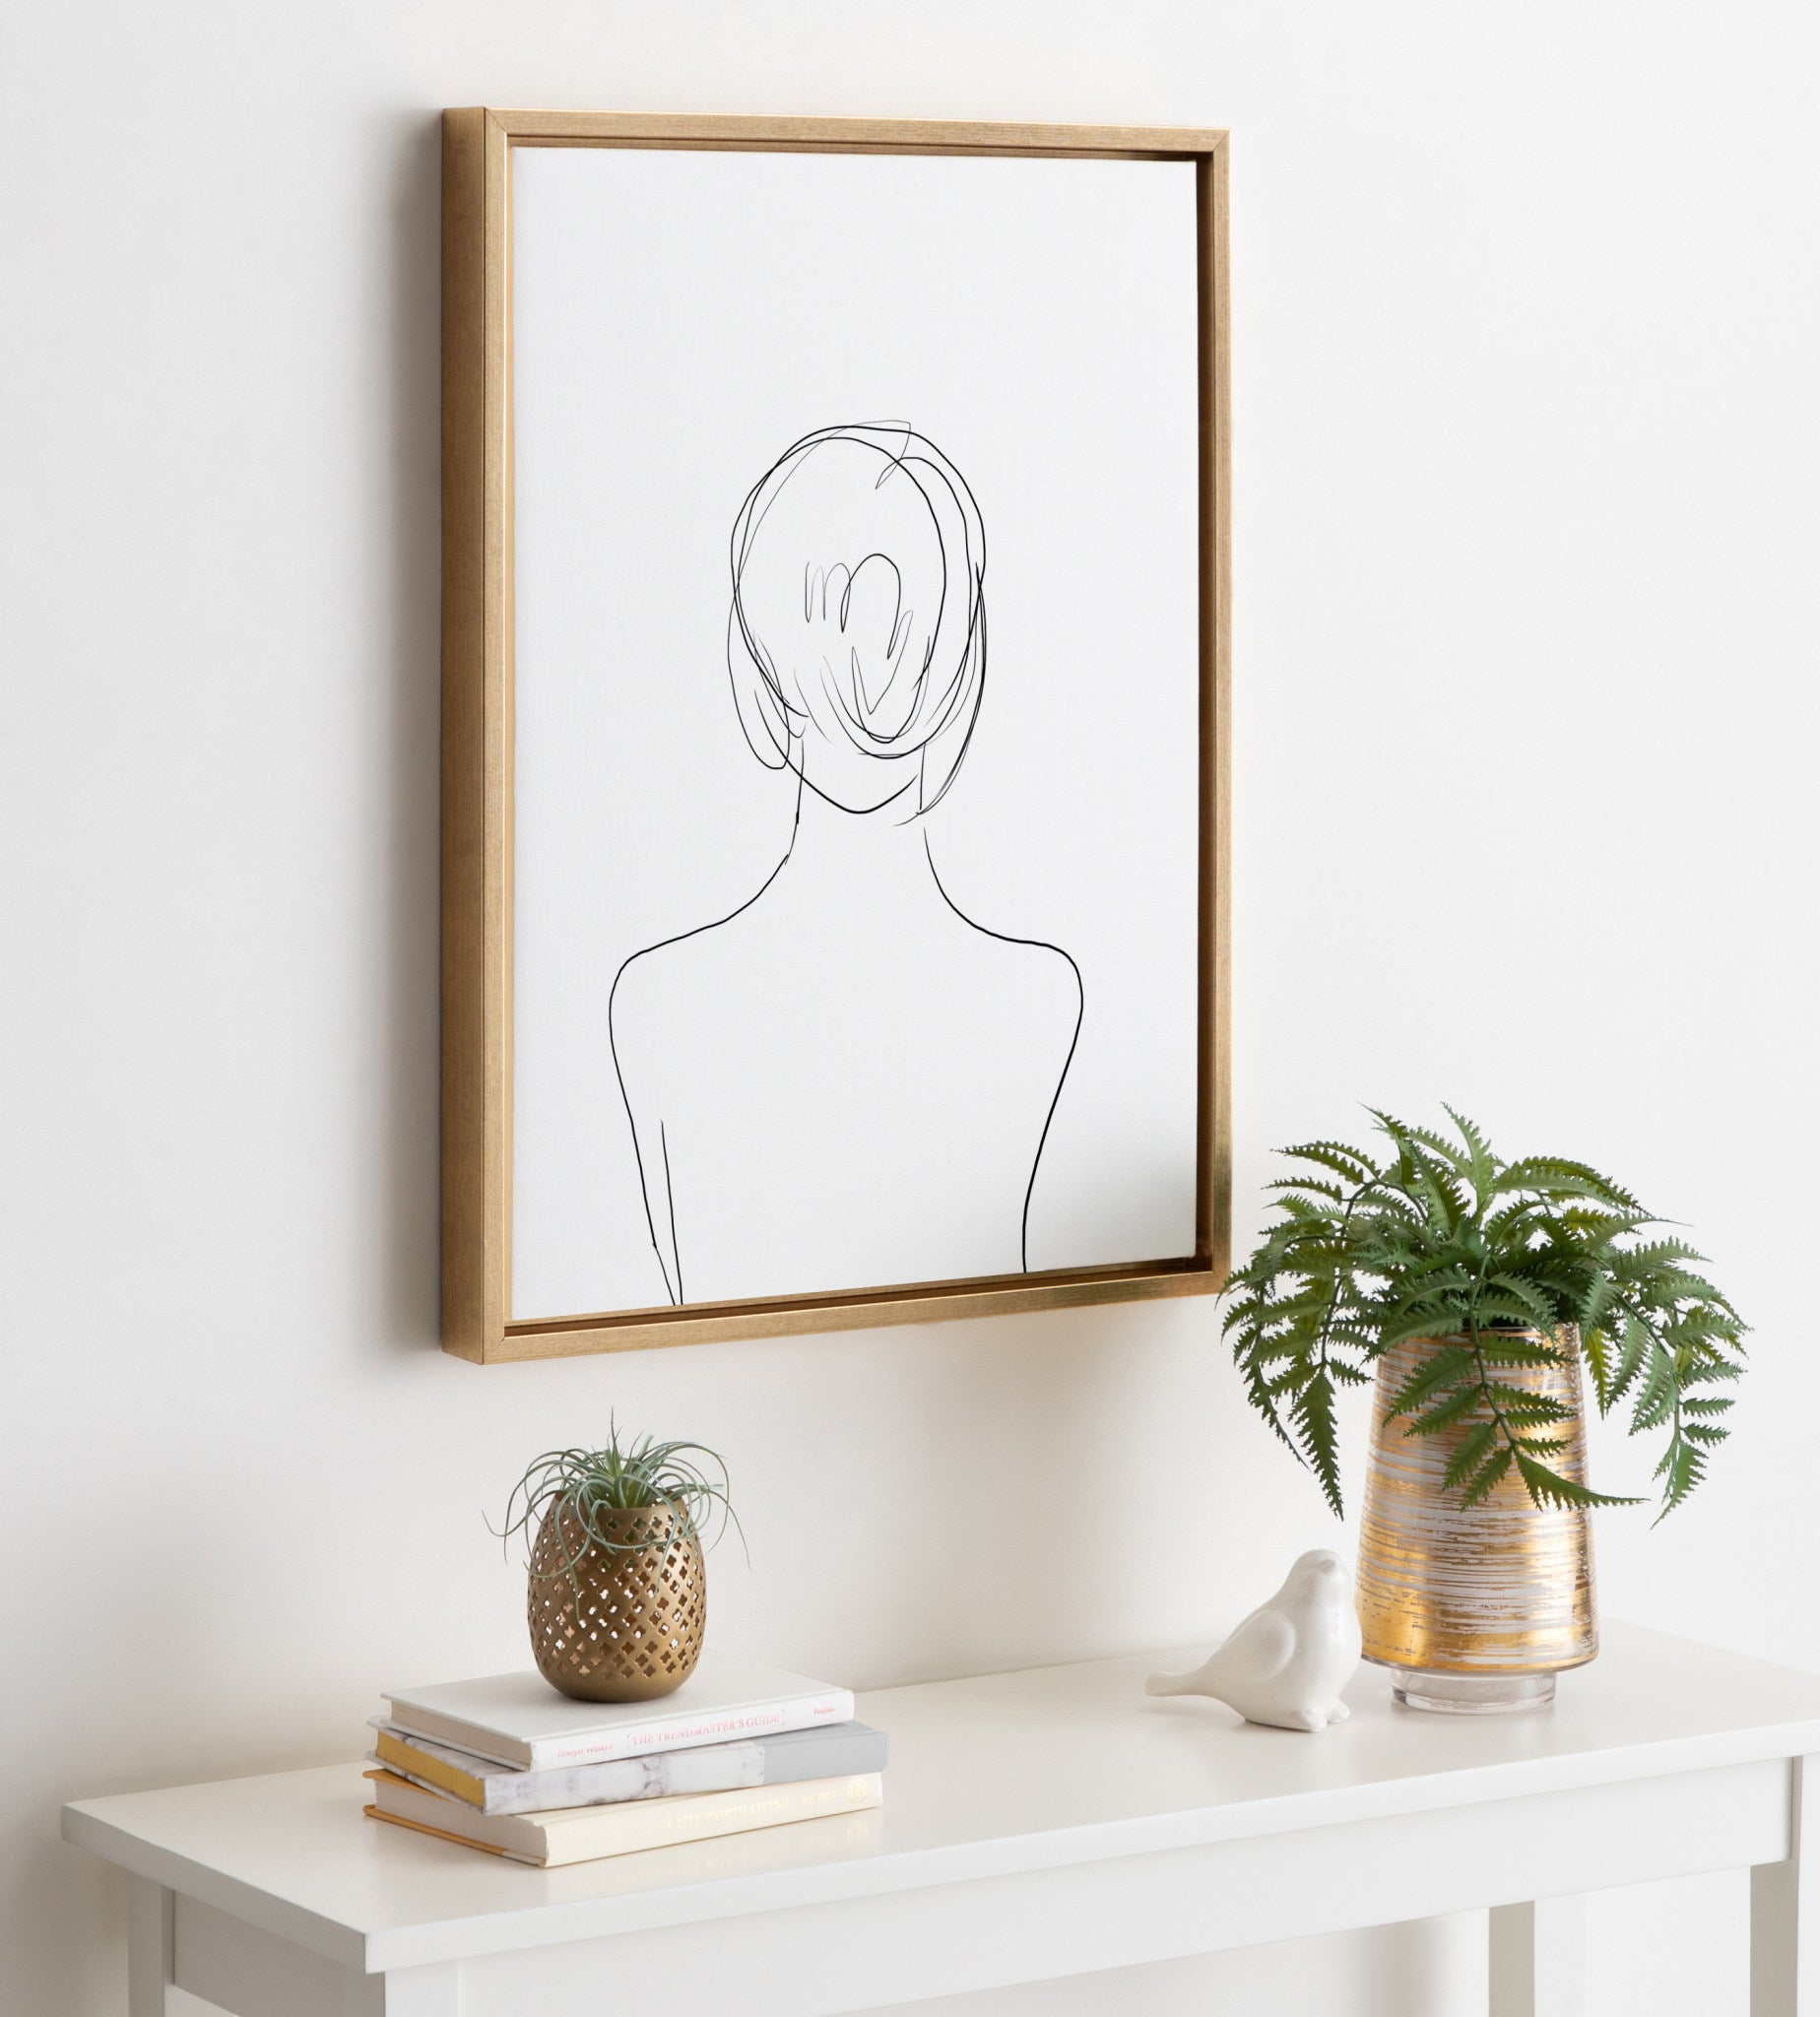 Sylvie Minimalist Woman Framed Canvas by Teju Reval of SnazzyHues